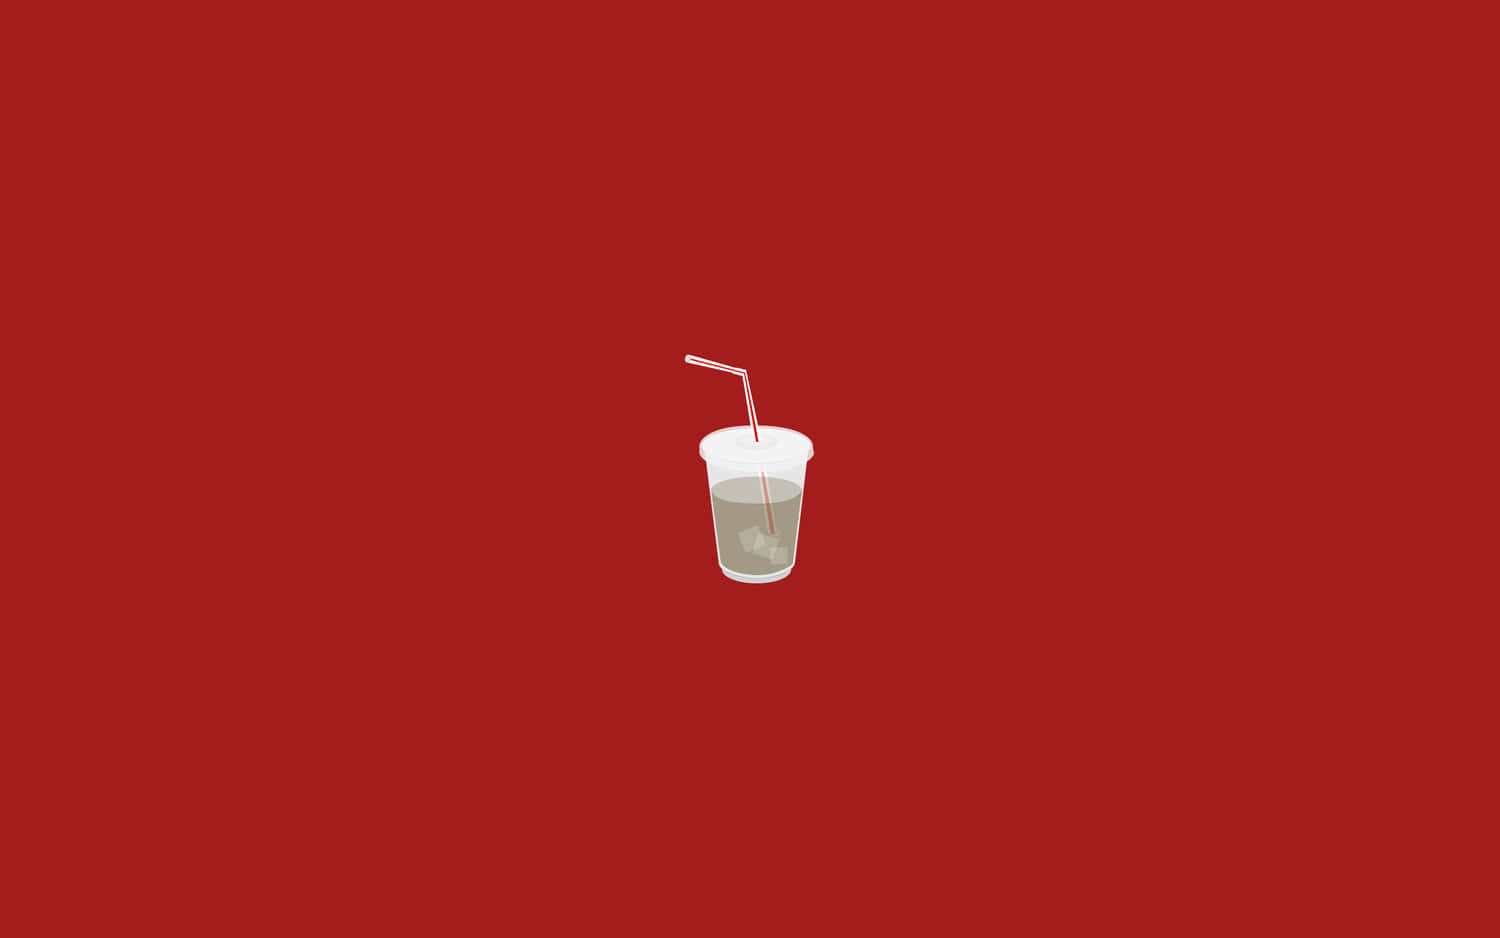 Red Aesthetic Laptop Straw Cup Wallpaper